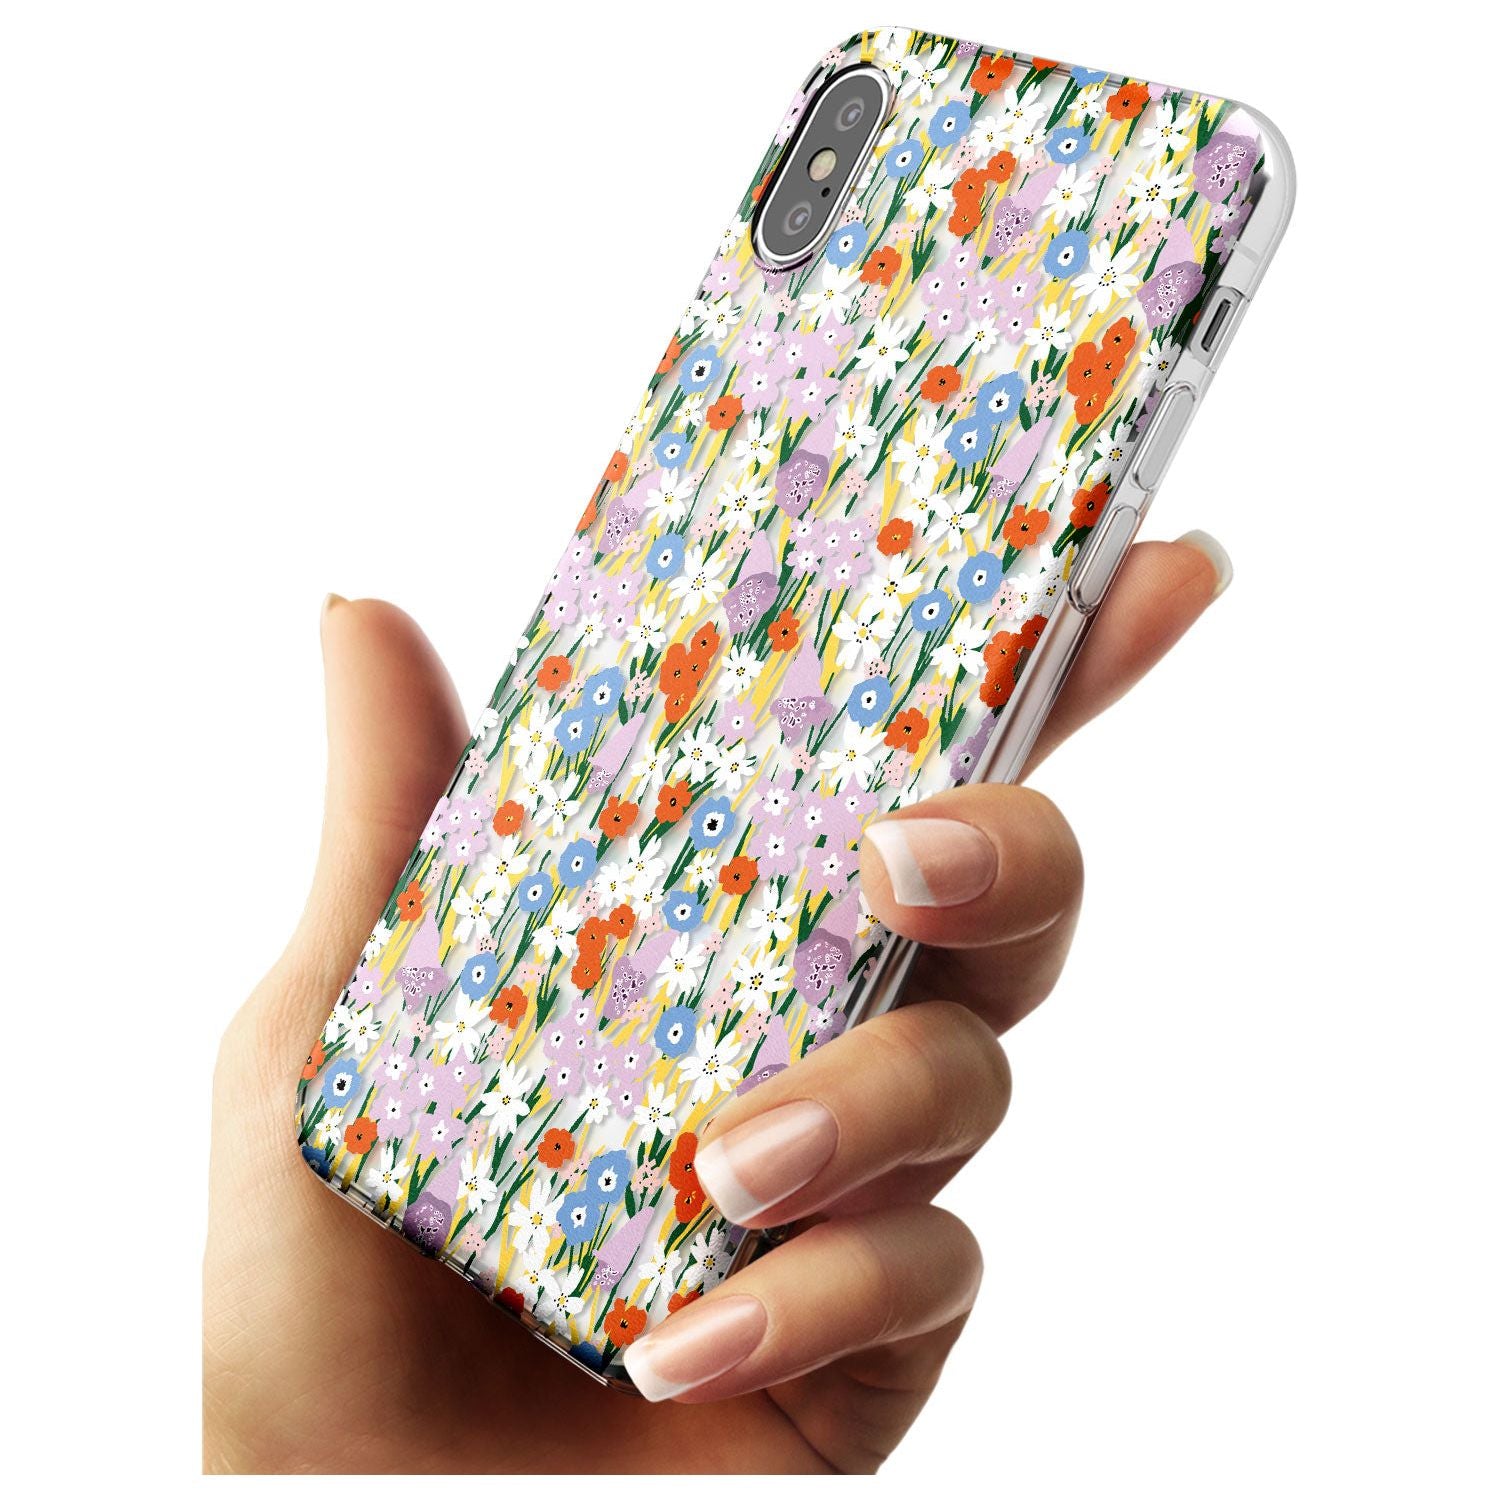 Energetic Floral Mix: Transparent Black Impact Phone Case for iPhone X XS Max XR